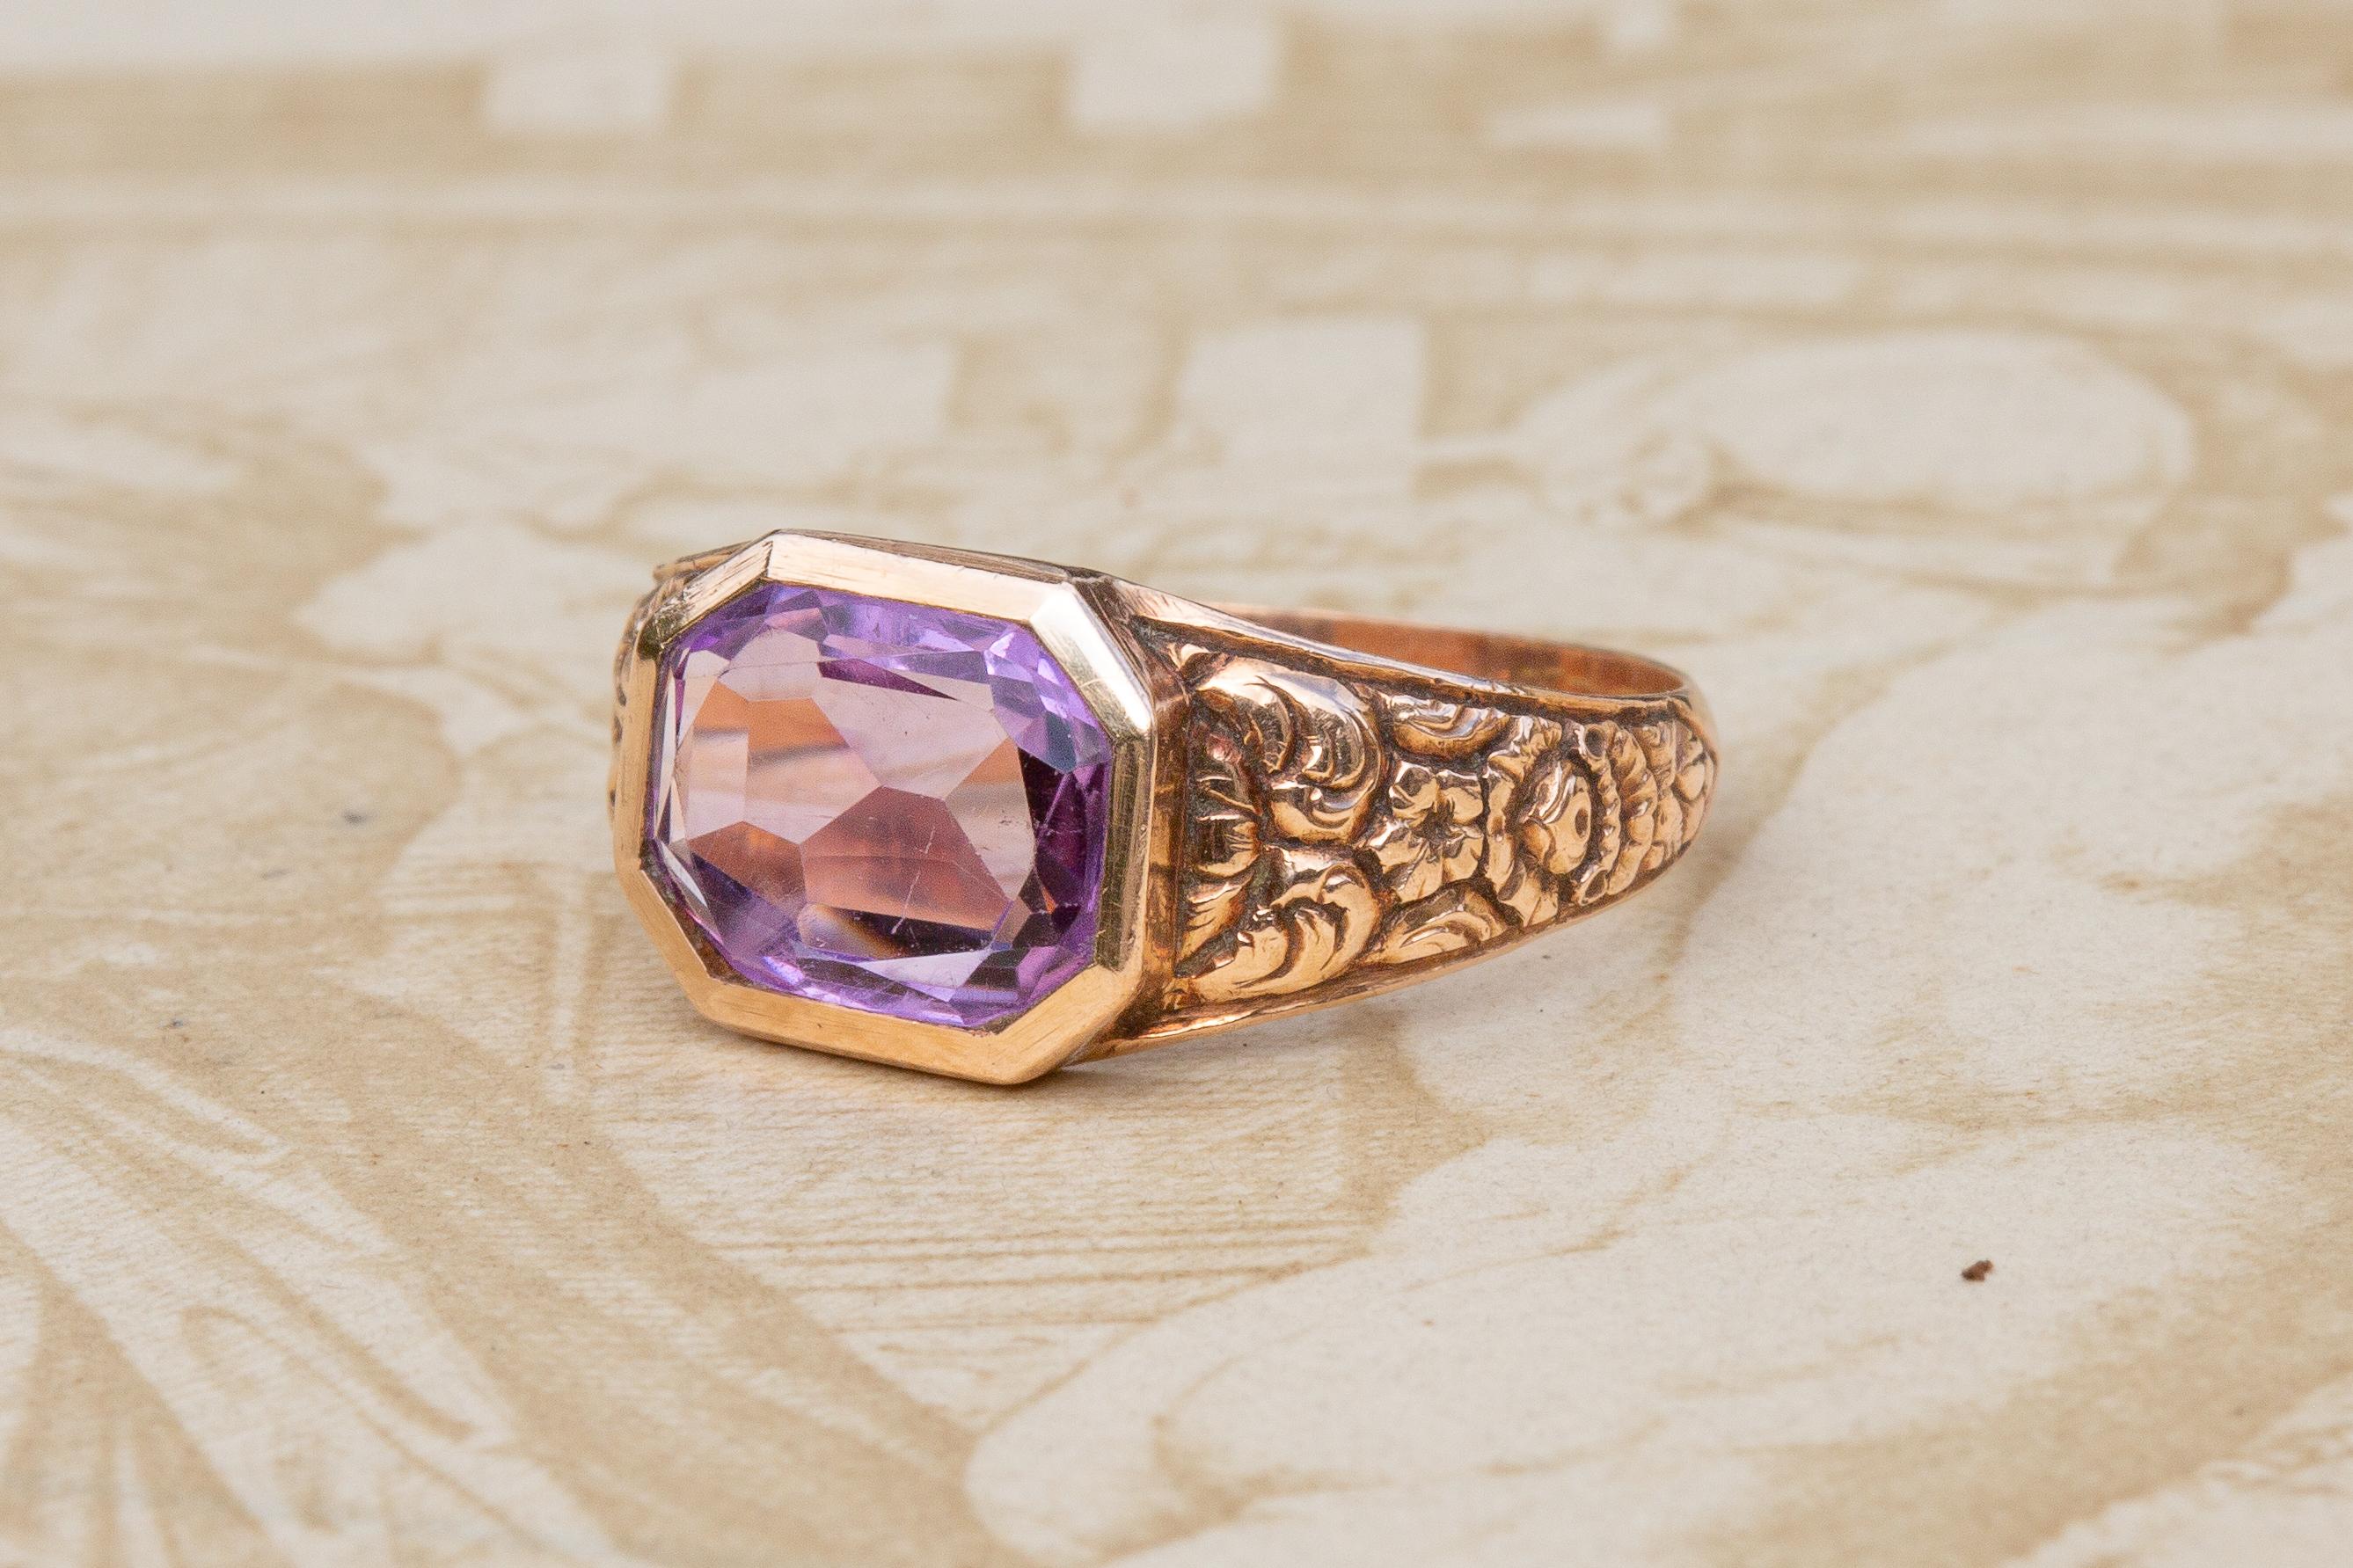 Late Victorian Stunning Antique Victorian 19th Century 14k Gold and Amethyst Ring